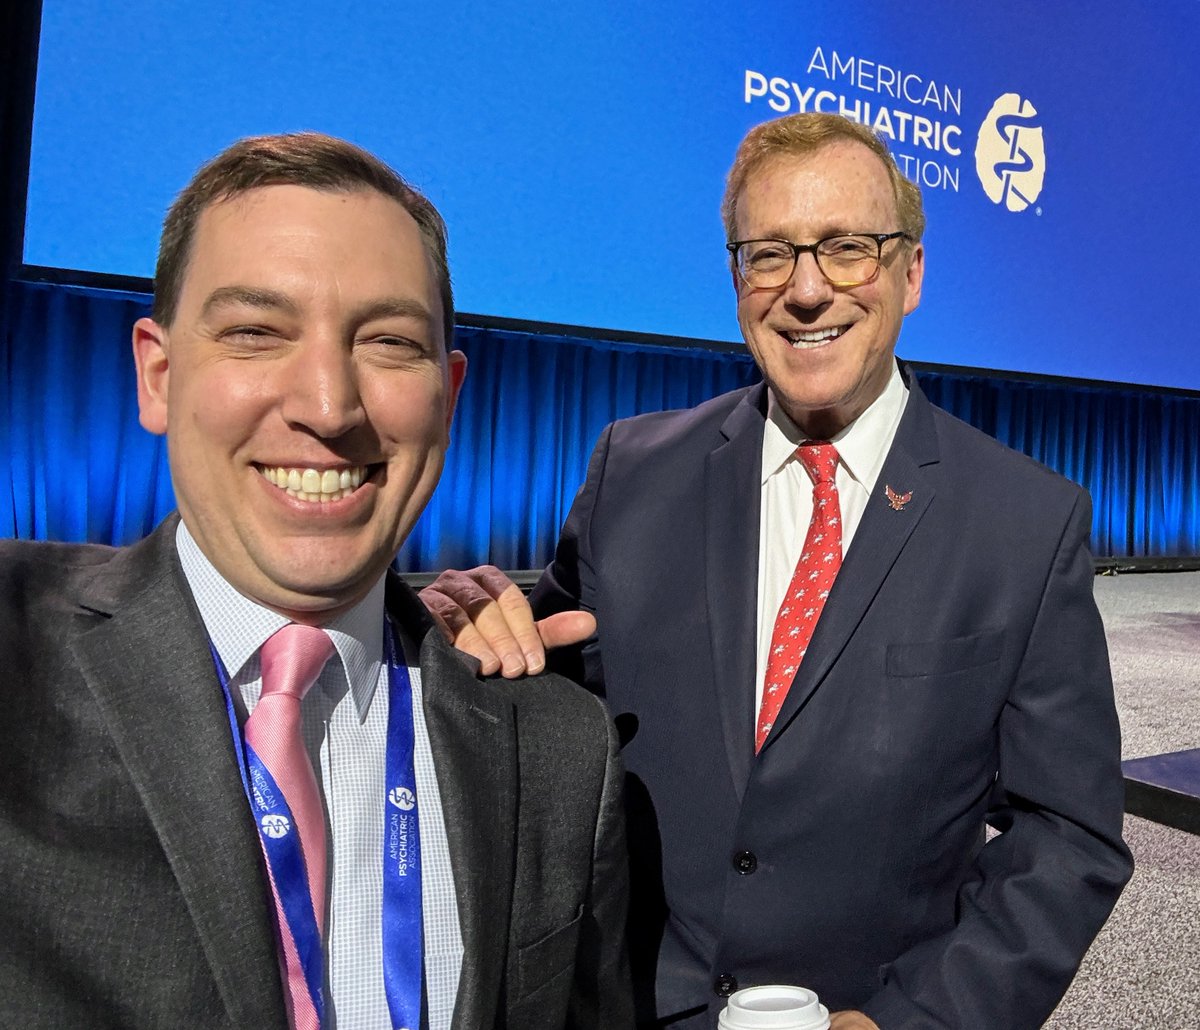 Incredible experience presenting at the @APApsychiatric annual meeting in NYC. Honored to be on stage with APA President Petros Levounis (@Pres_APA) & CEO @SaulLevinMD -- two of the most inspiring 'out' leaders in American medicine & #psychiatry